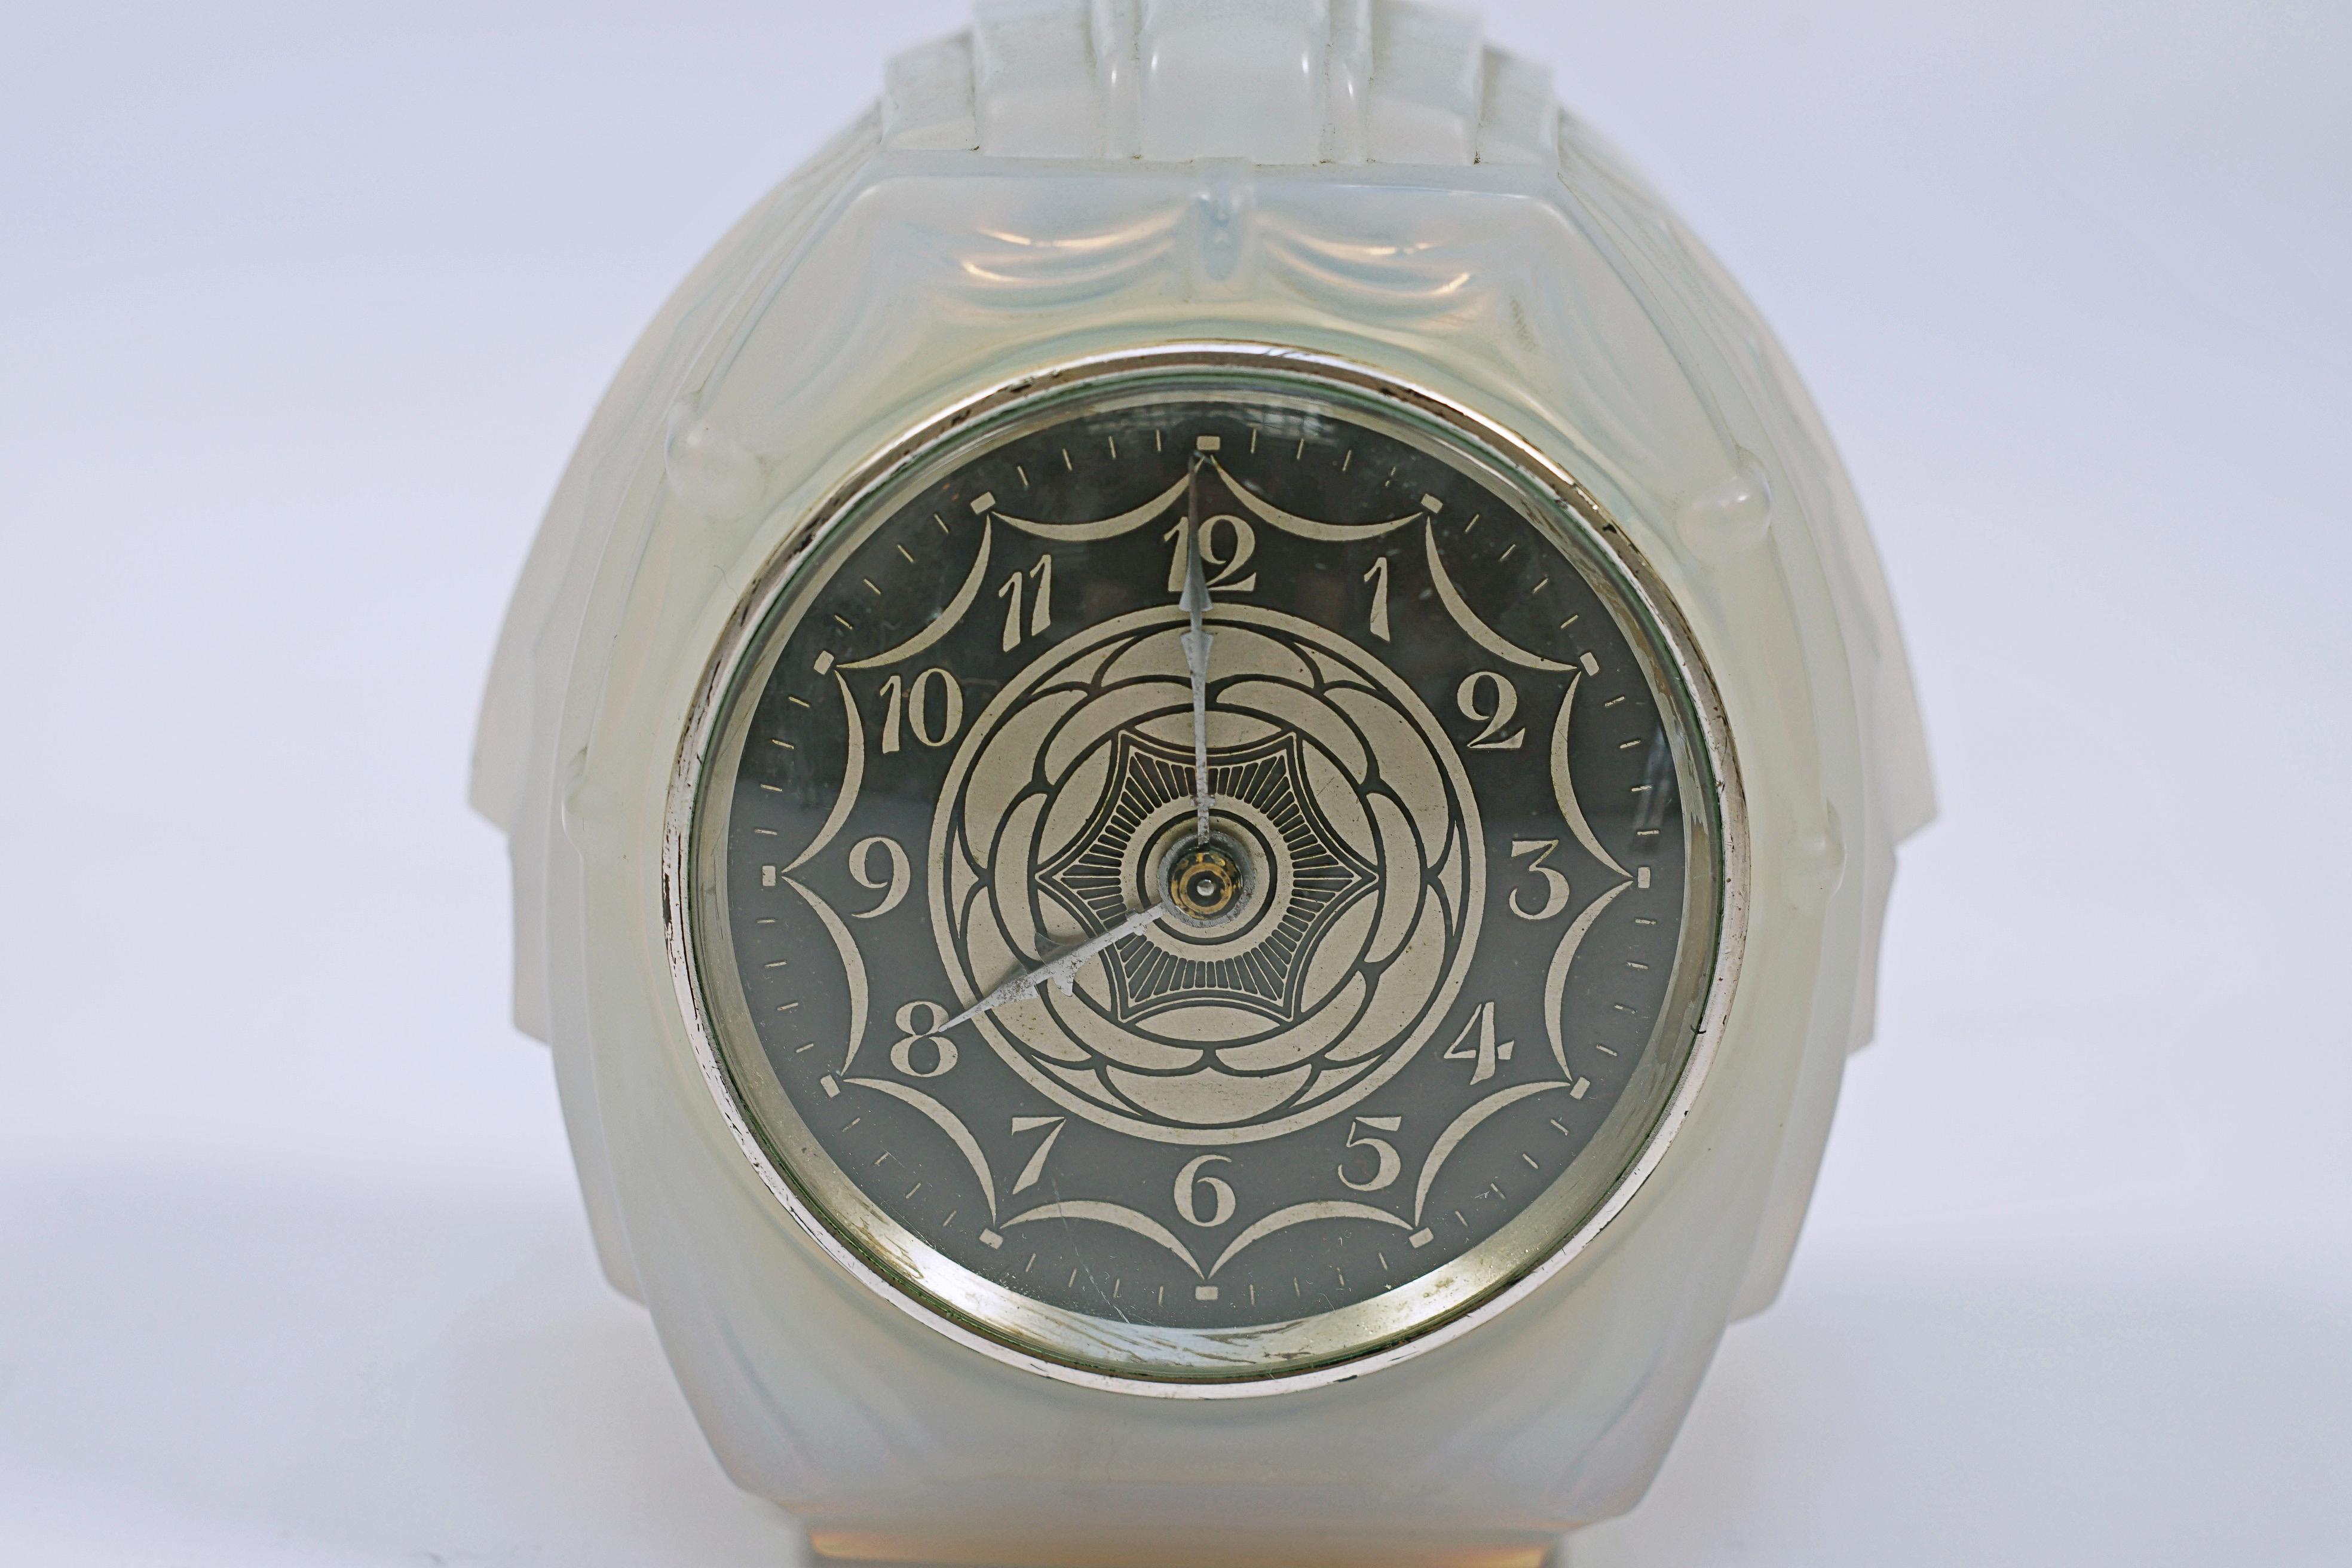 Art Deco clock made of frost glass, with enameled and silver-plated bronze dial, made by Sabino. Signed Sabino, machine EC, France.

France, CIRCA 1920.